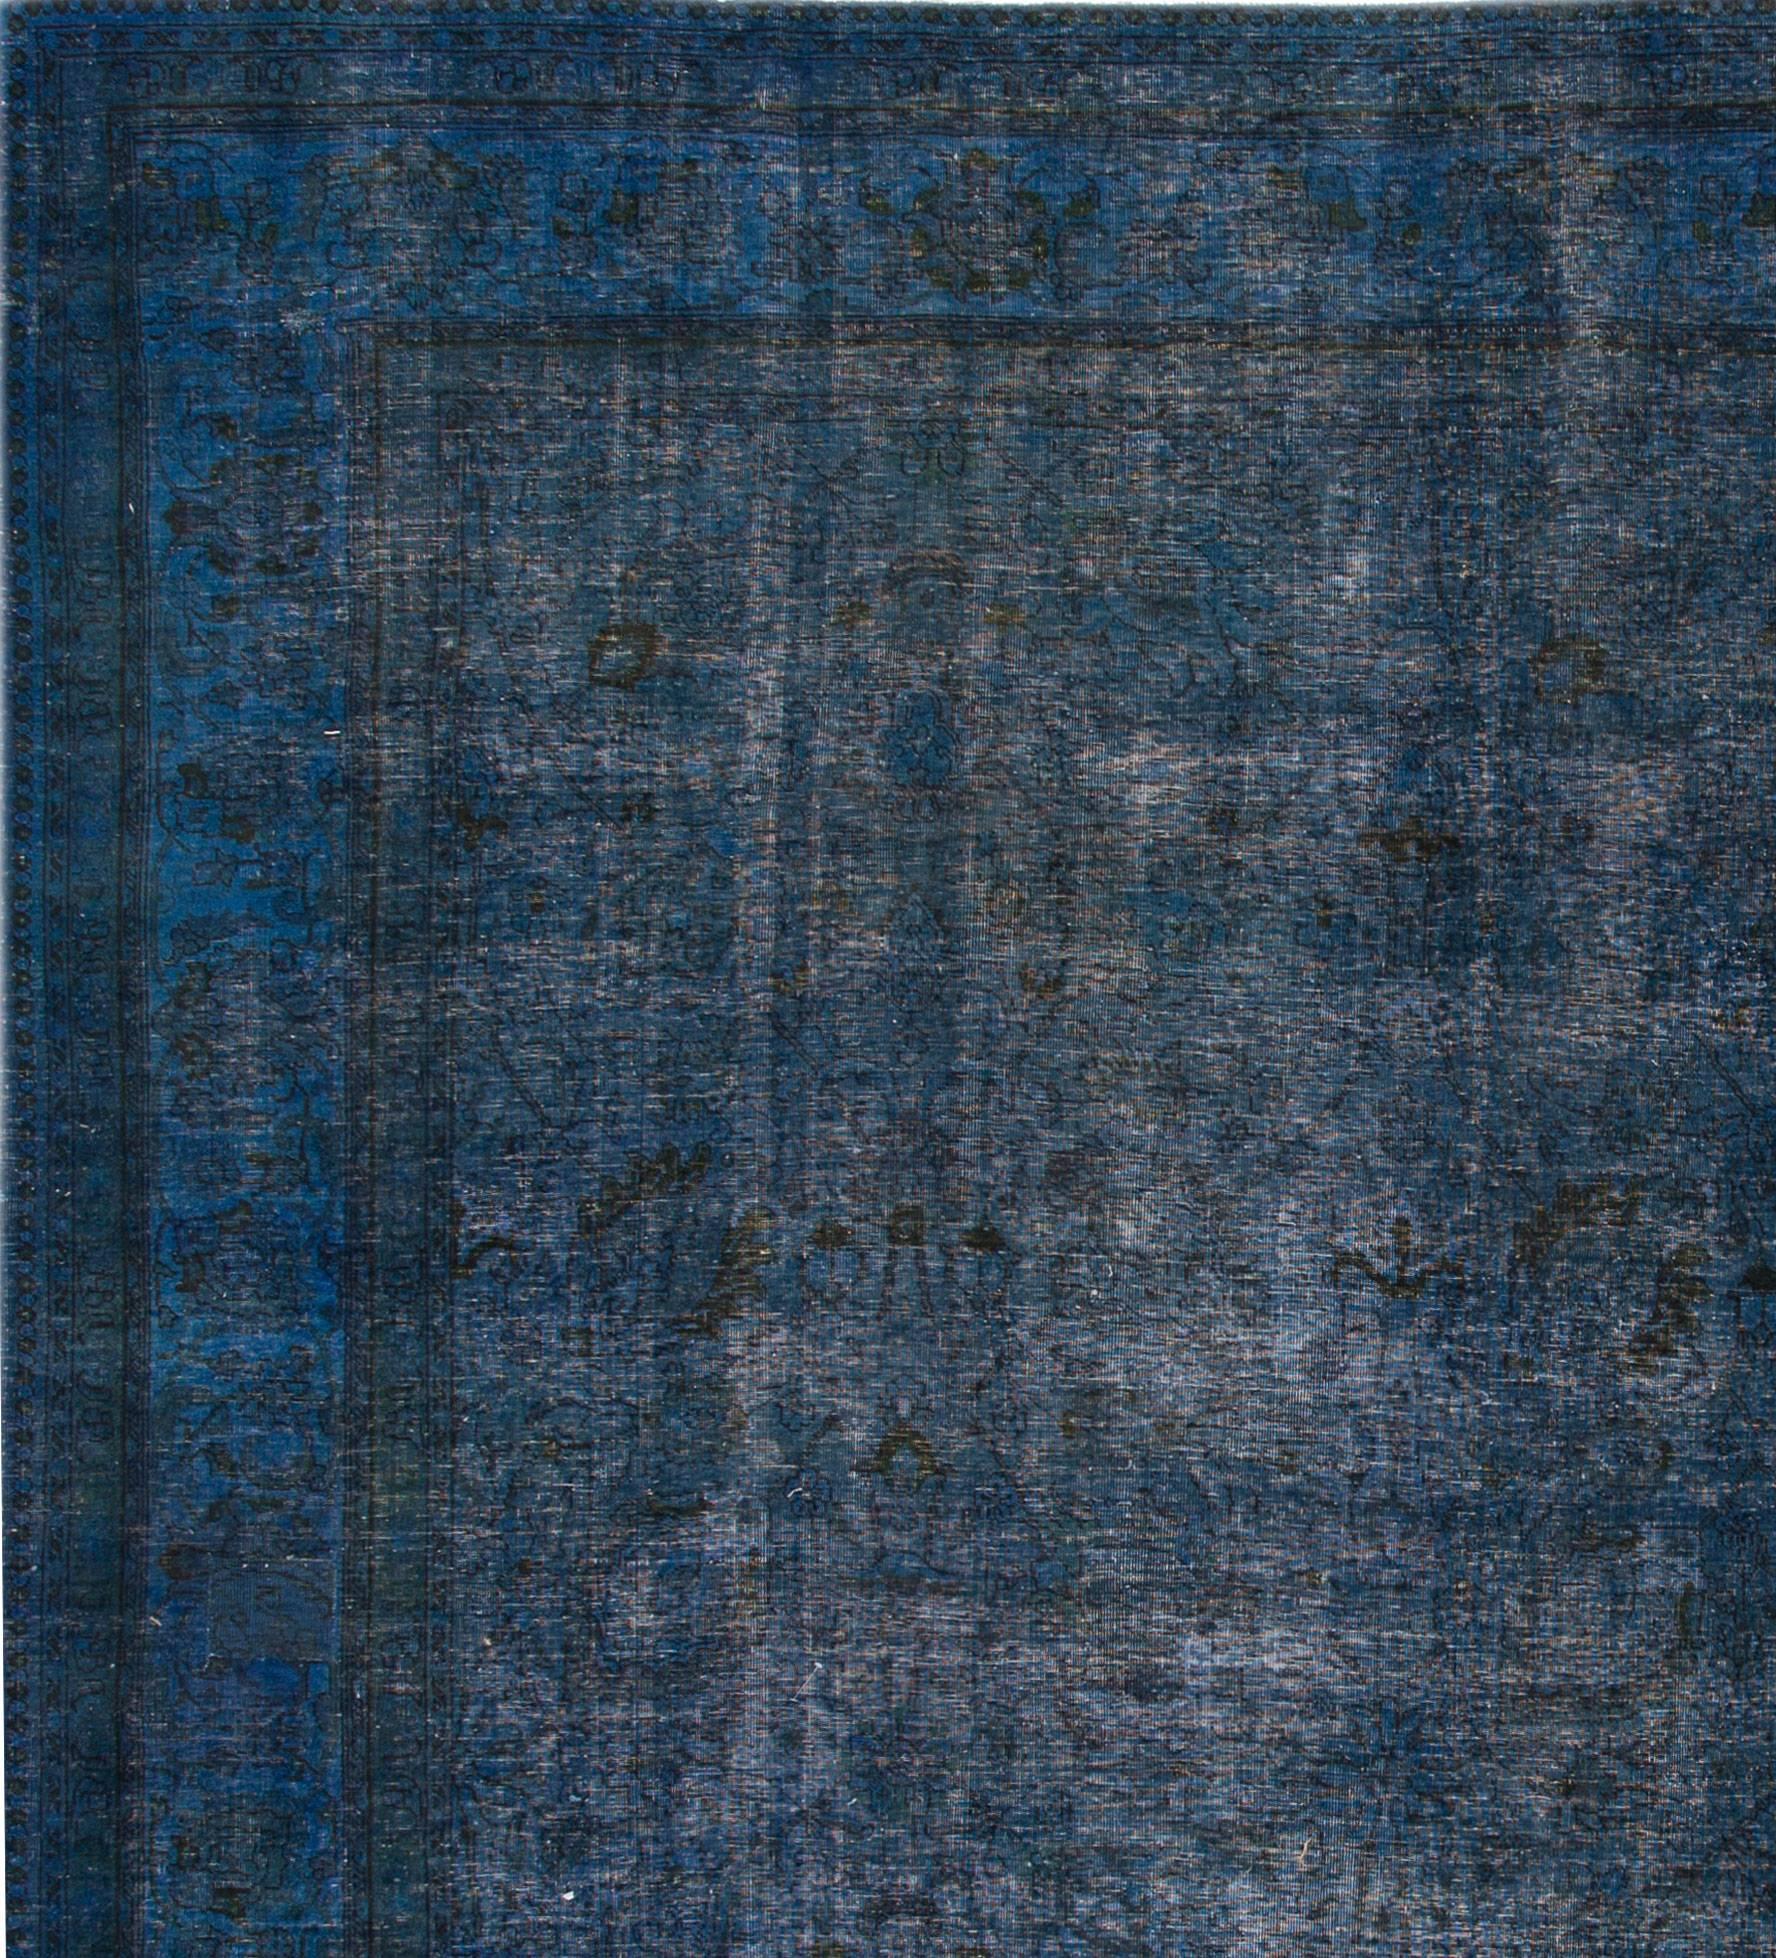 Vintage 1960s hand-knotted overdyed Persian carpet with a dark blue field and floral border. Measures 12.04x13.